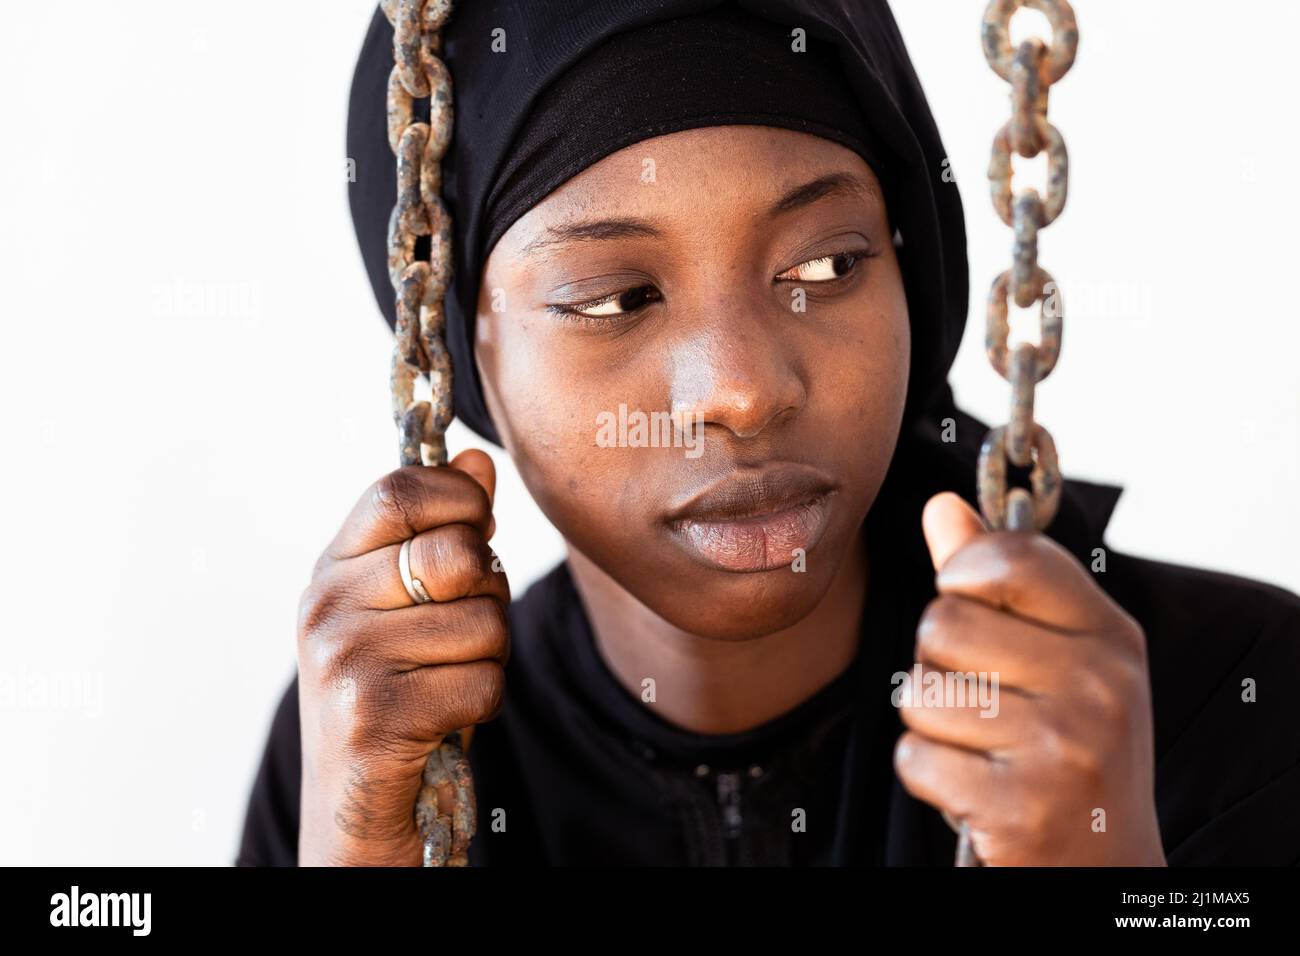 Sad young African girl behind the chains, symbolizing captivity, imprisonment or confinement; claim for justice and gender equality Stock Photo